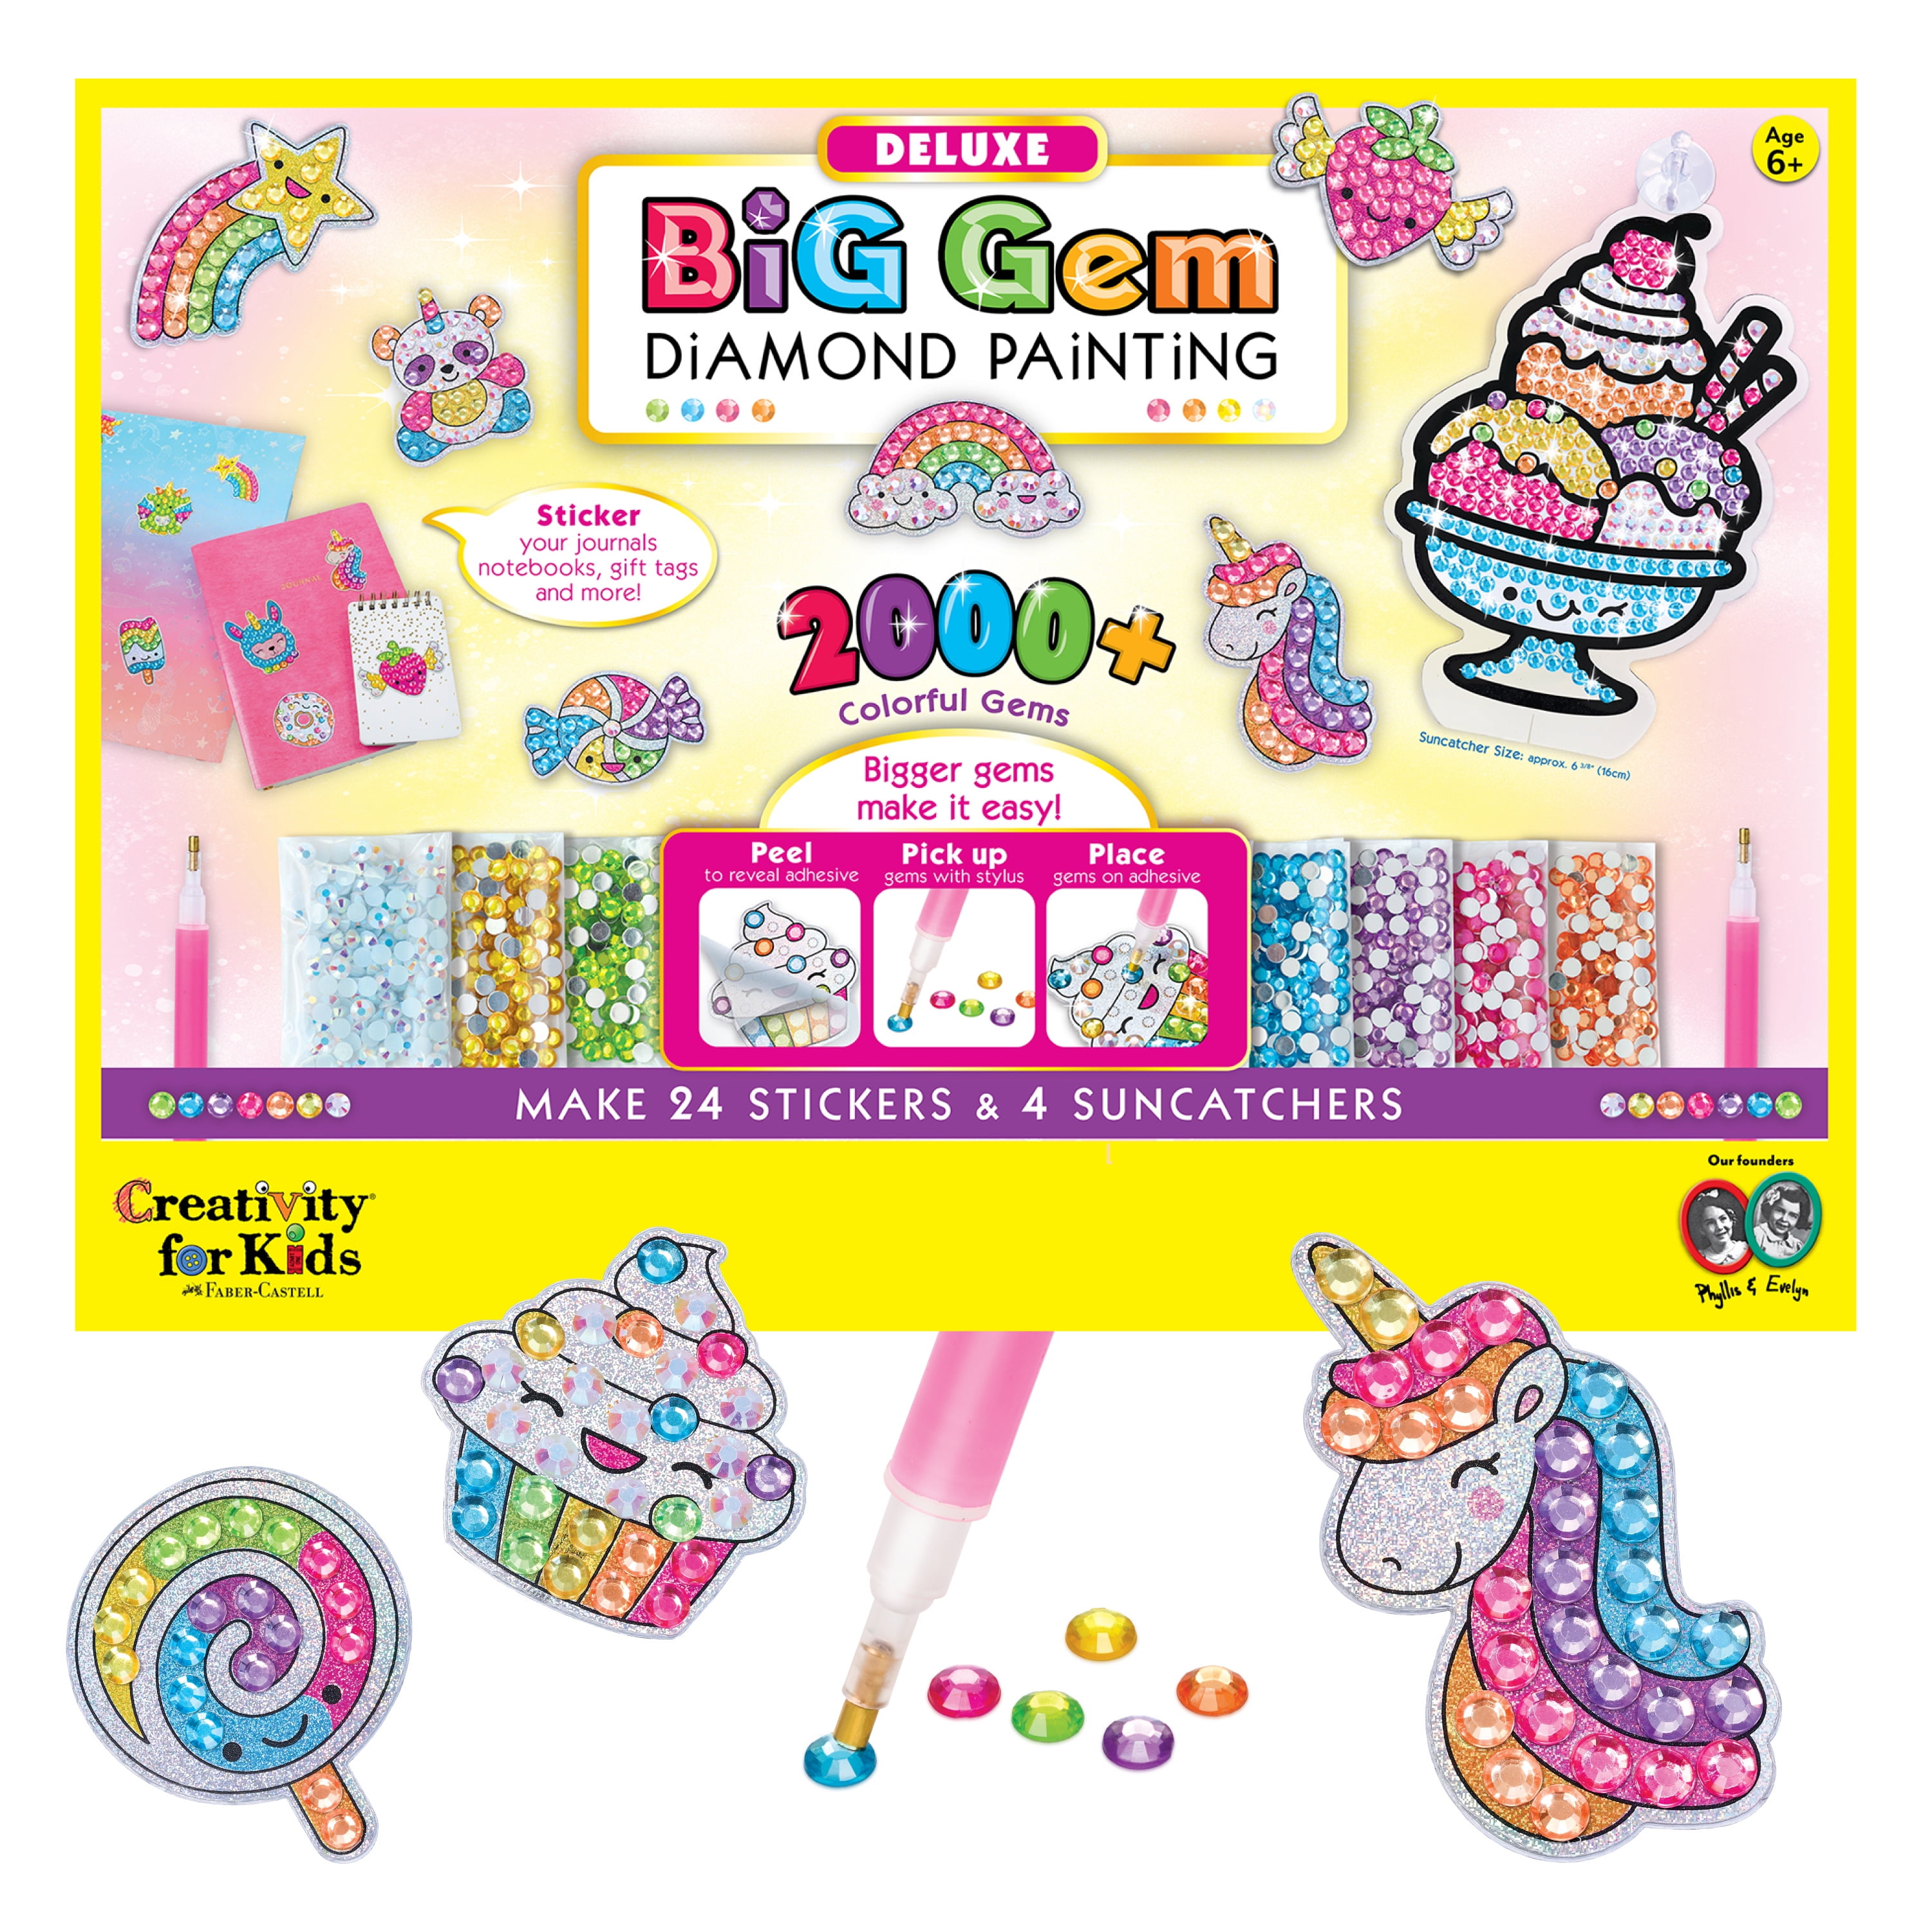 Creativity for Kids Deluxe Big Gem Diamond Painting- Child Craft Kit for Boys and Girls 6+ by xpwholesale